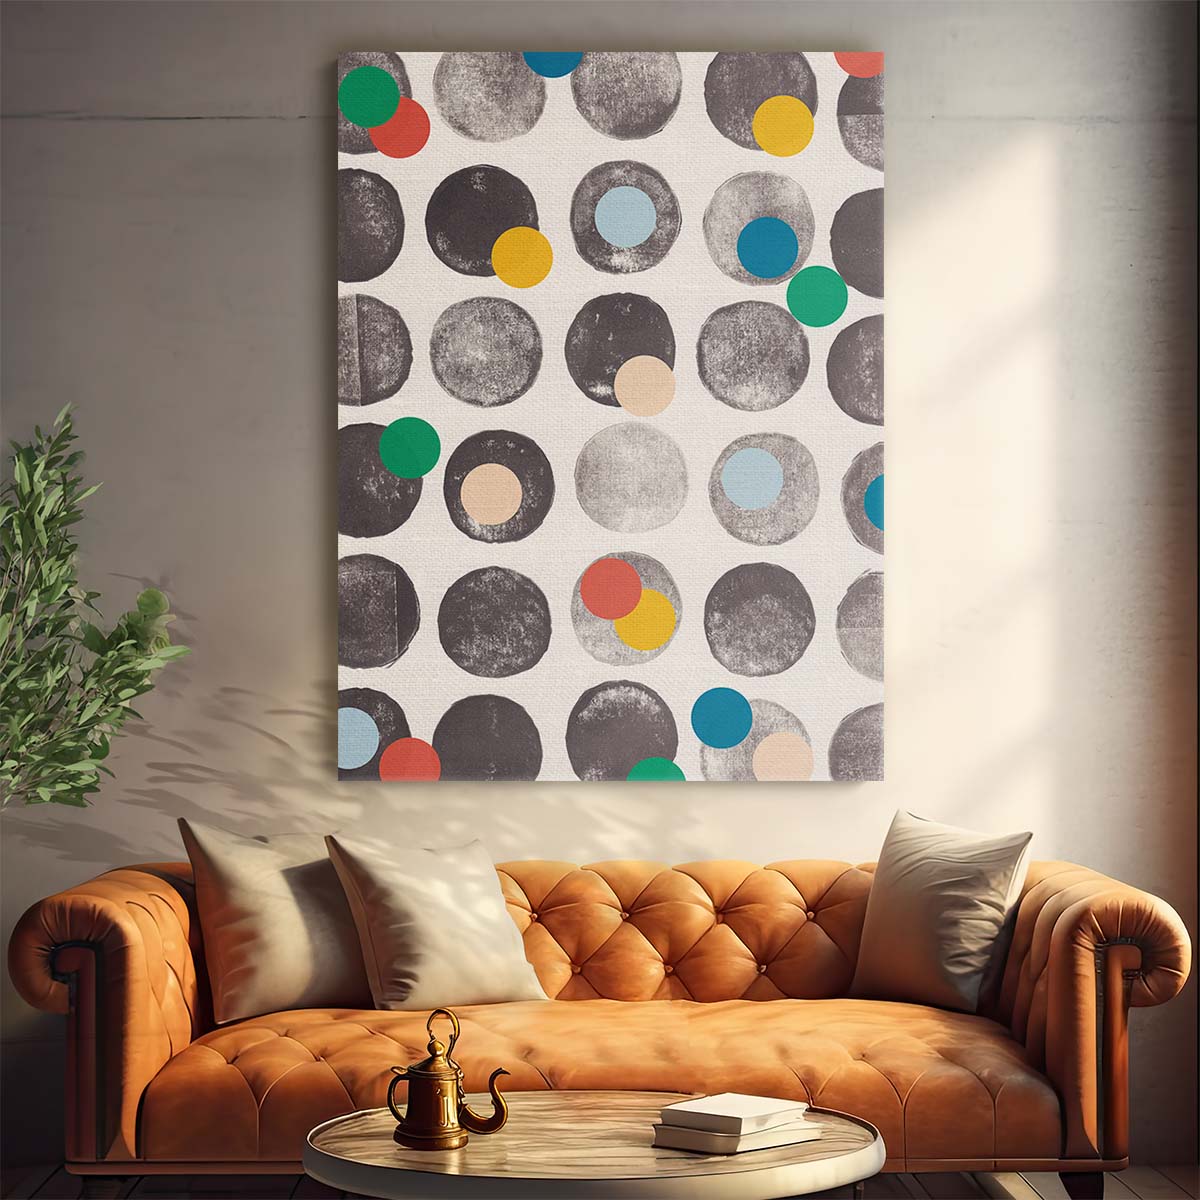 Vibrant Geometric Abstract Illustration - Monochrome Boho Circle Wall Art by Luxuriance Designs, made in USA